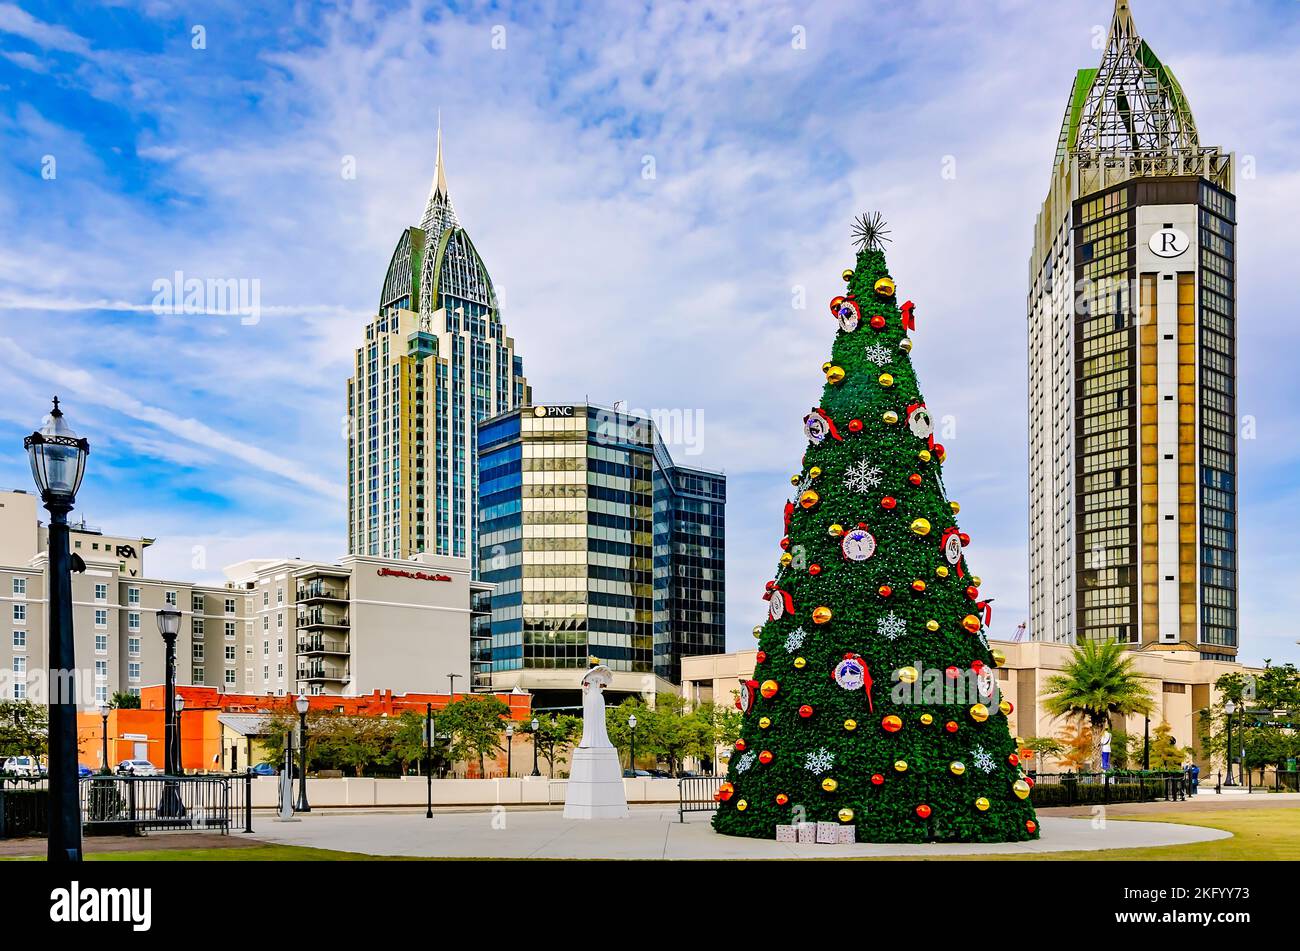 The city Christmas tree is displayed at Mardi Gras Park, Nov. 20, 2022, in Mobile, Alabama. Stock Photo